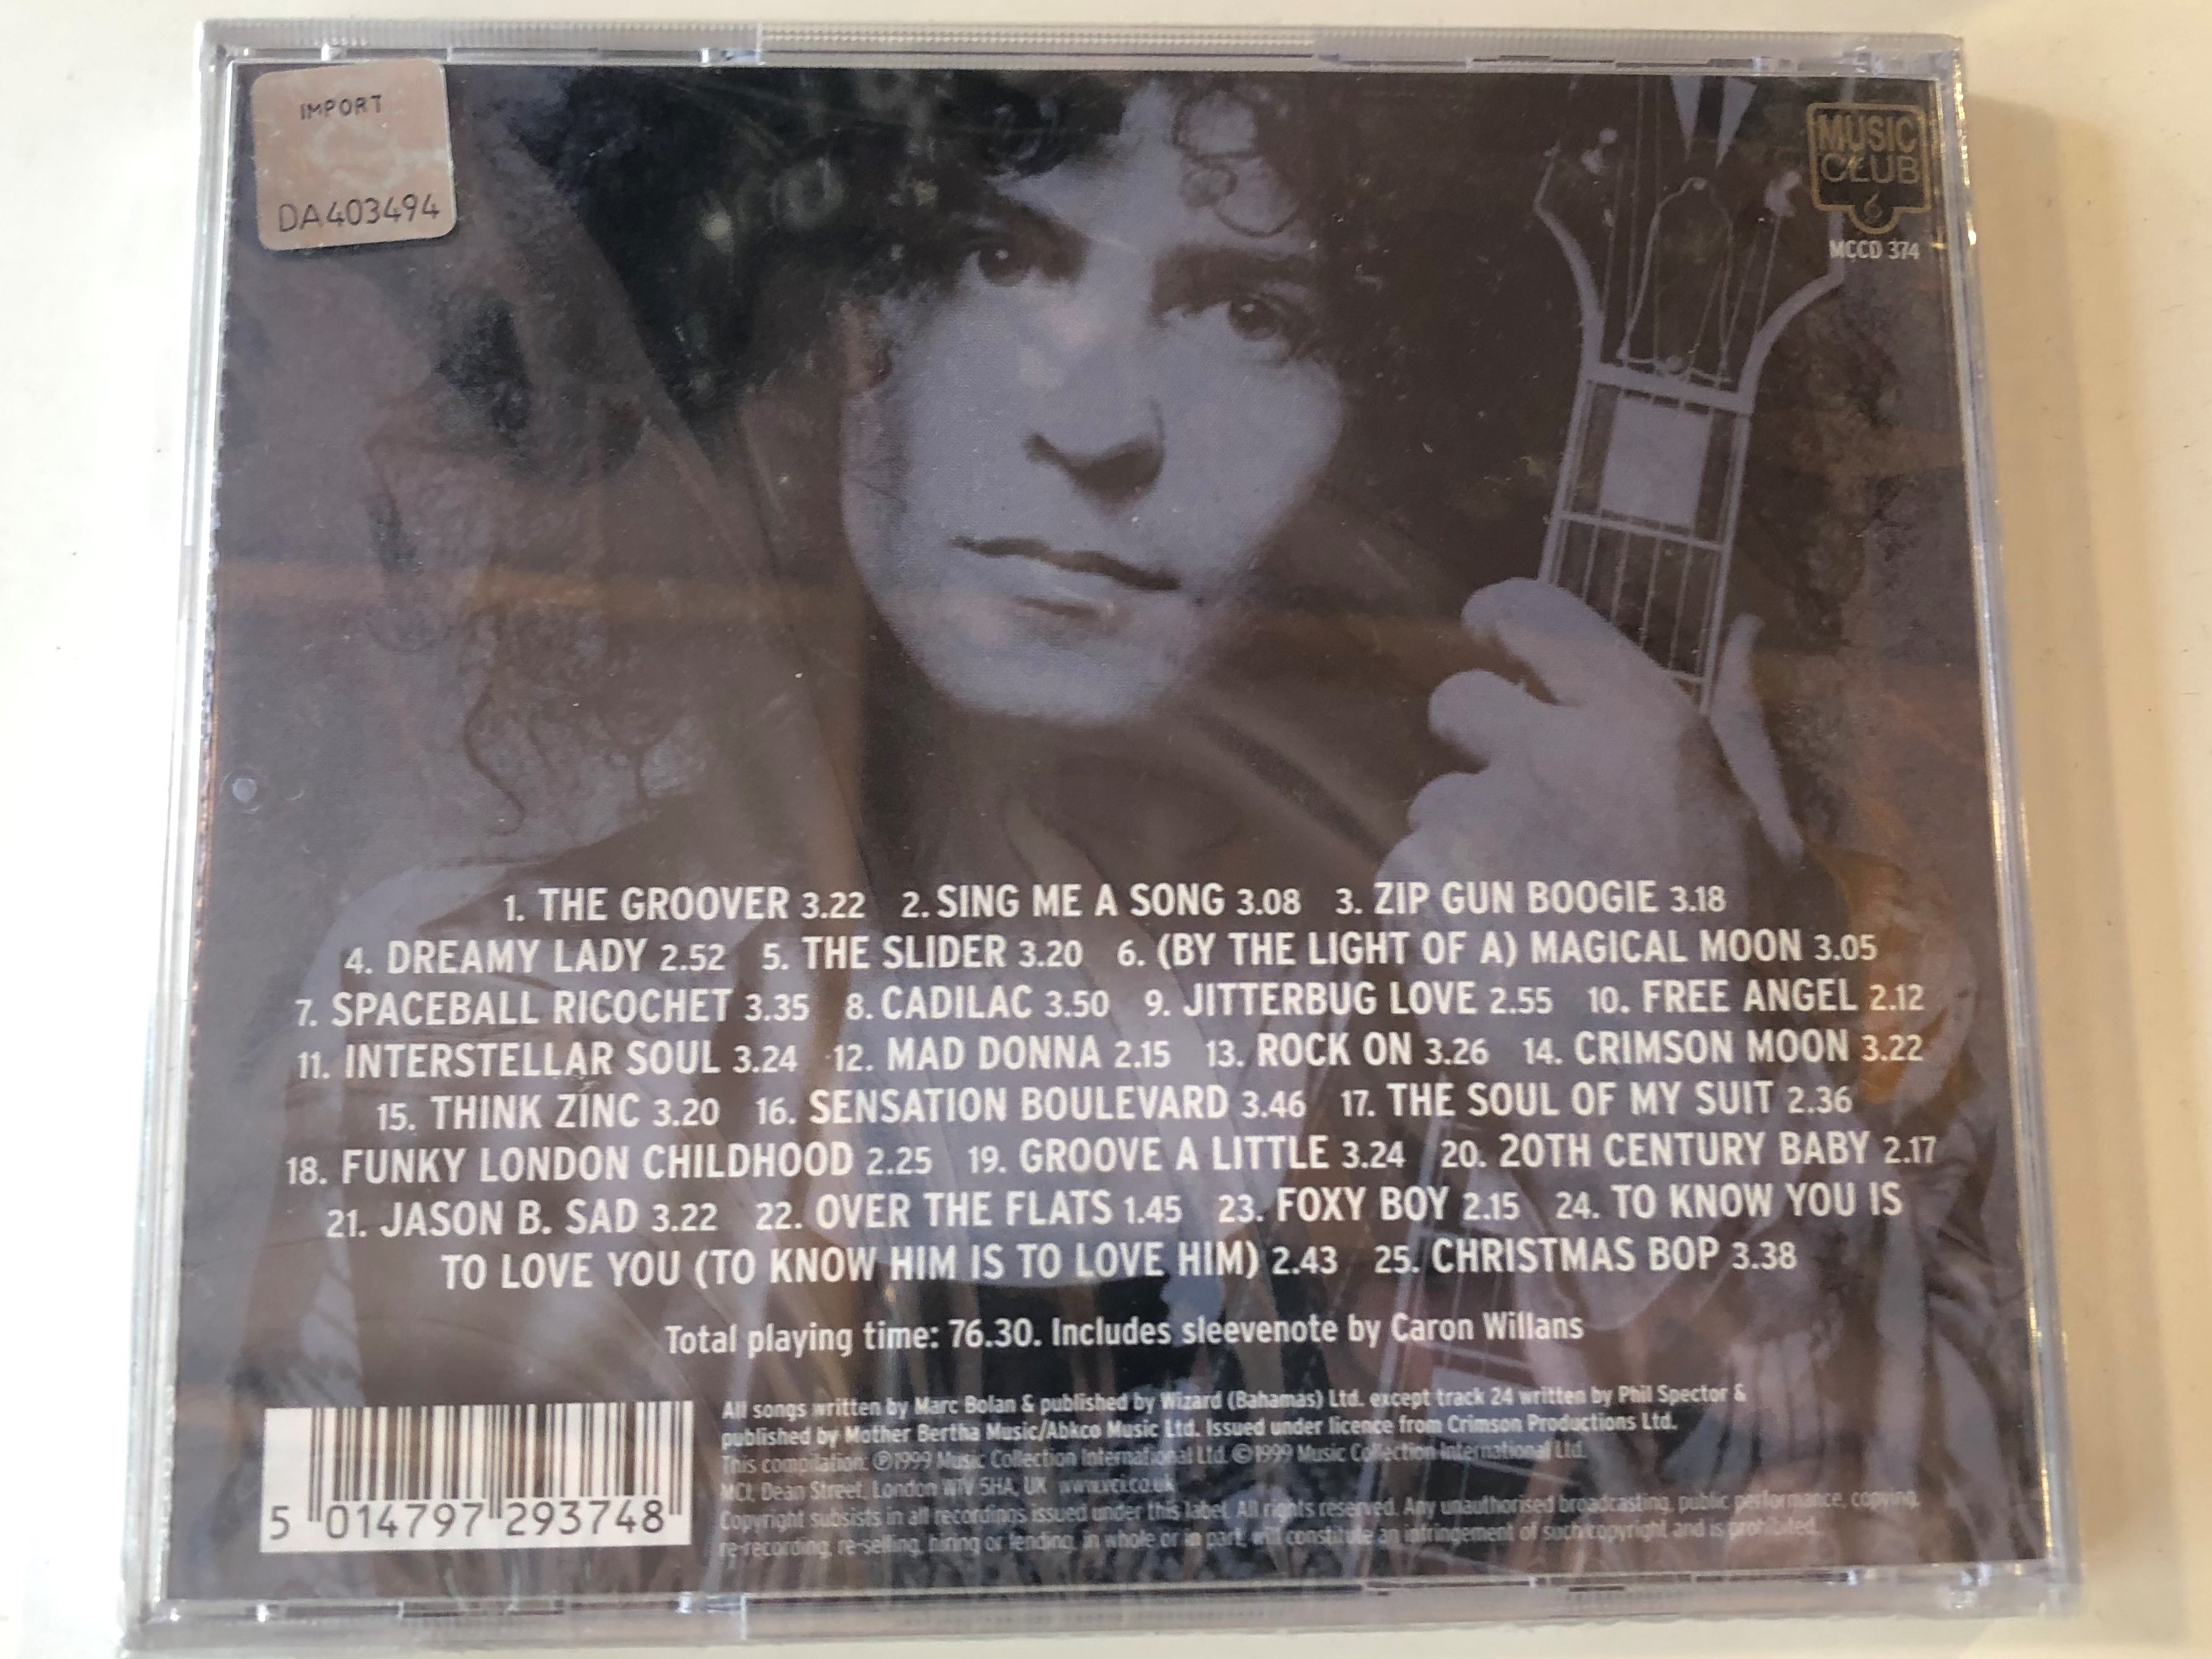 the-very-best-of-t.rex-vol.-2-digitally-remastered-25-tracks-including-the-groover-zip-gun-boogie-sing-me-a-song-and-dreamy-lady-music-club-audio-cd-1999-mccd-374-2-.jpg